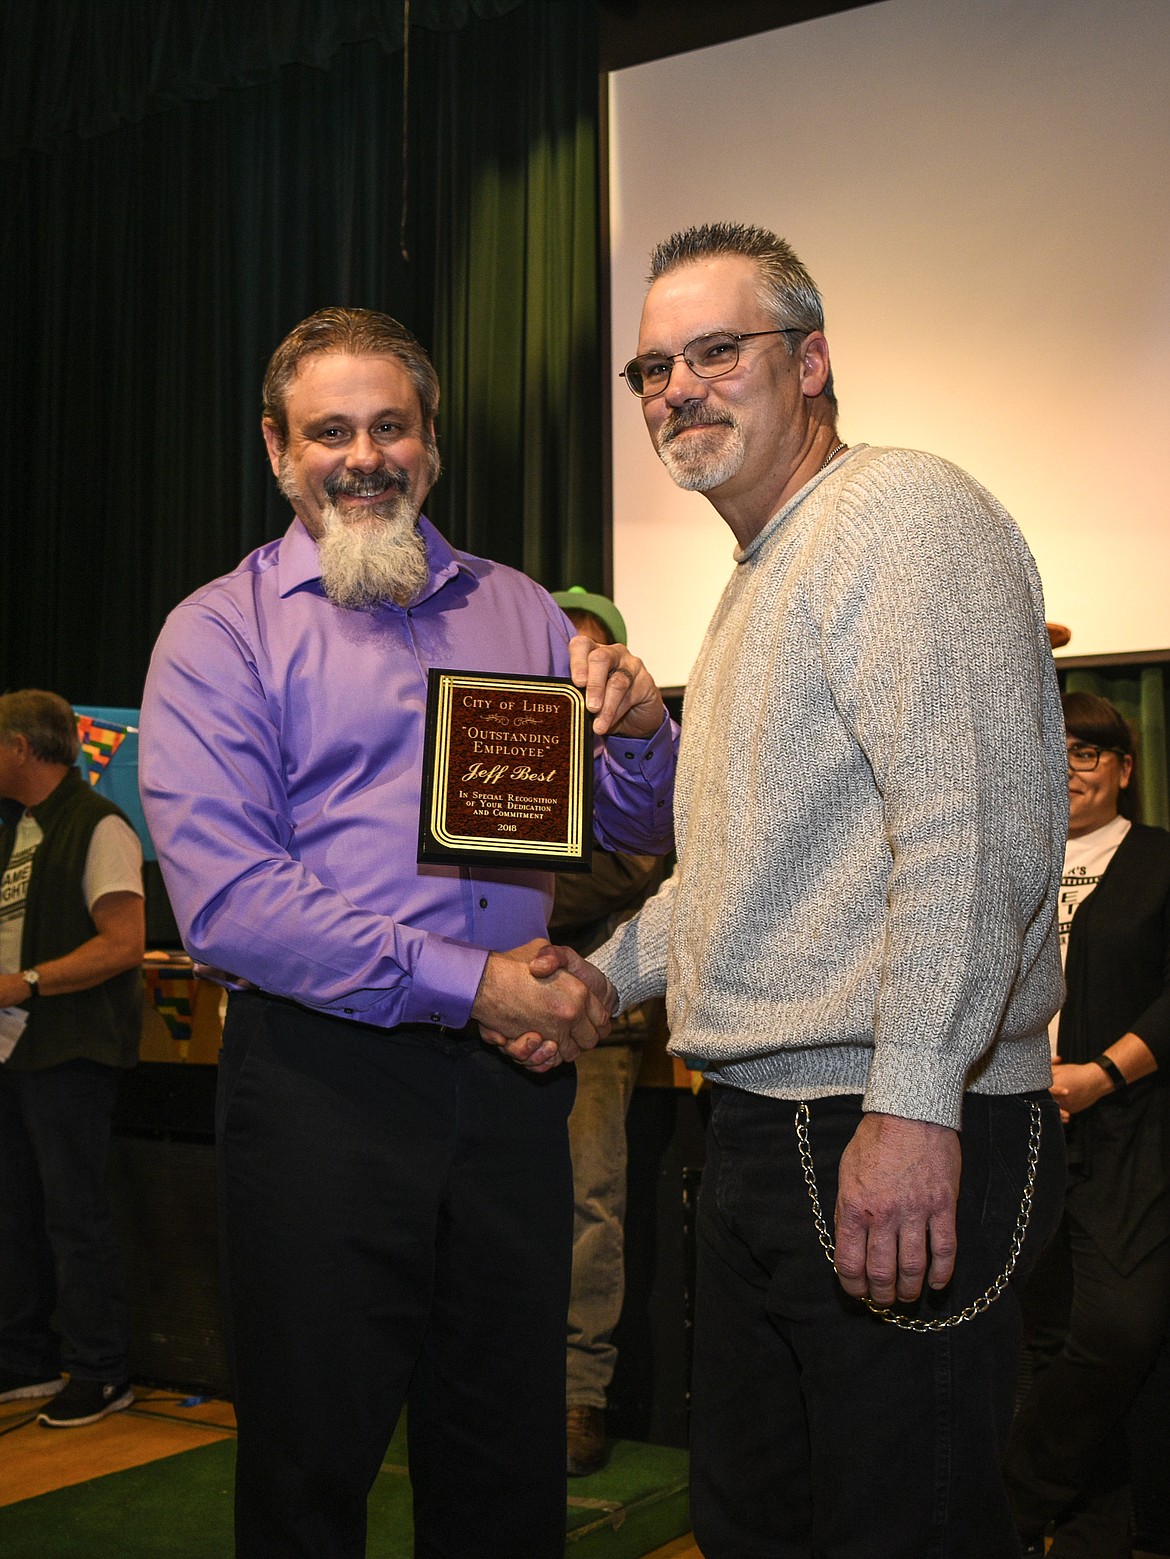 Jeff Best was presented with the City of Libby Outstanding Employee award by Mayor Brent Teske at the Libby Chamber of Commerce annual fundraiser and awards banquet Friday. (Ben Kibbey/The Western News)